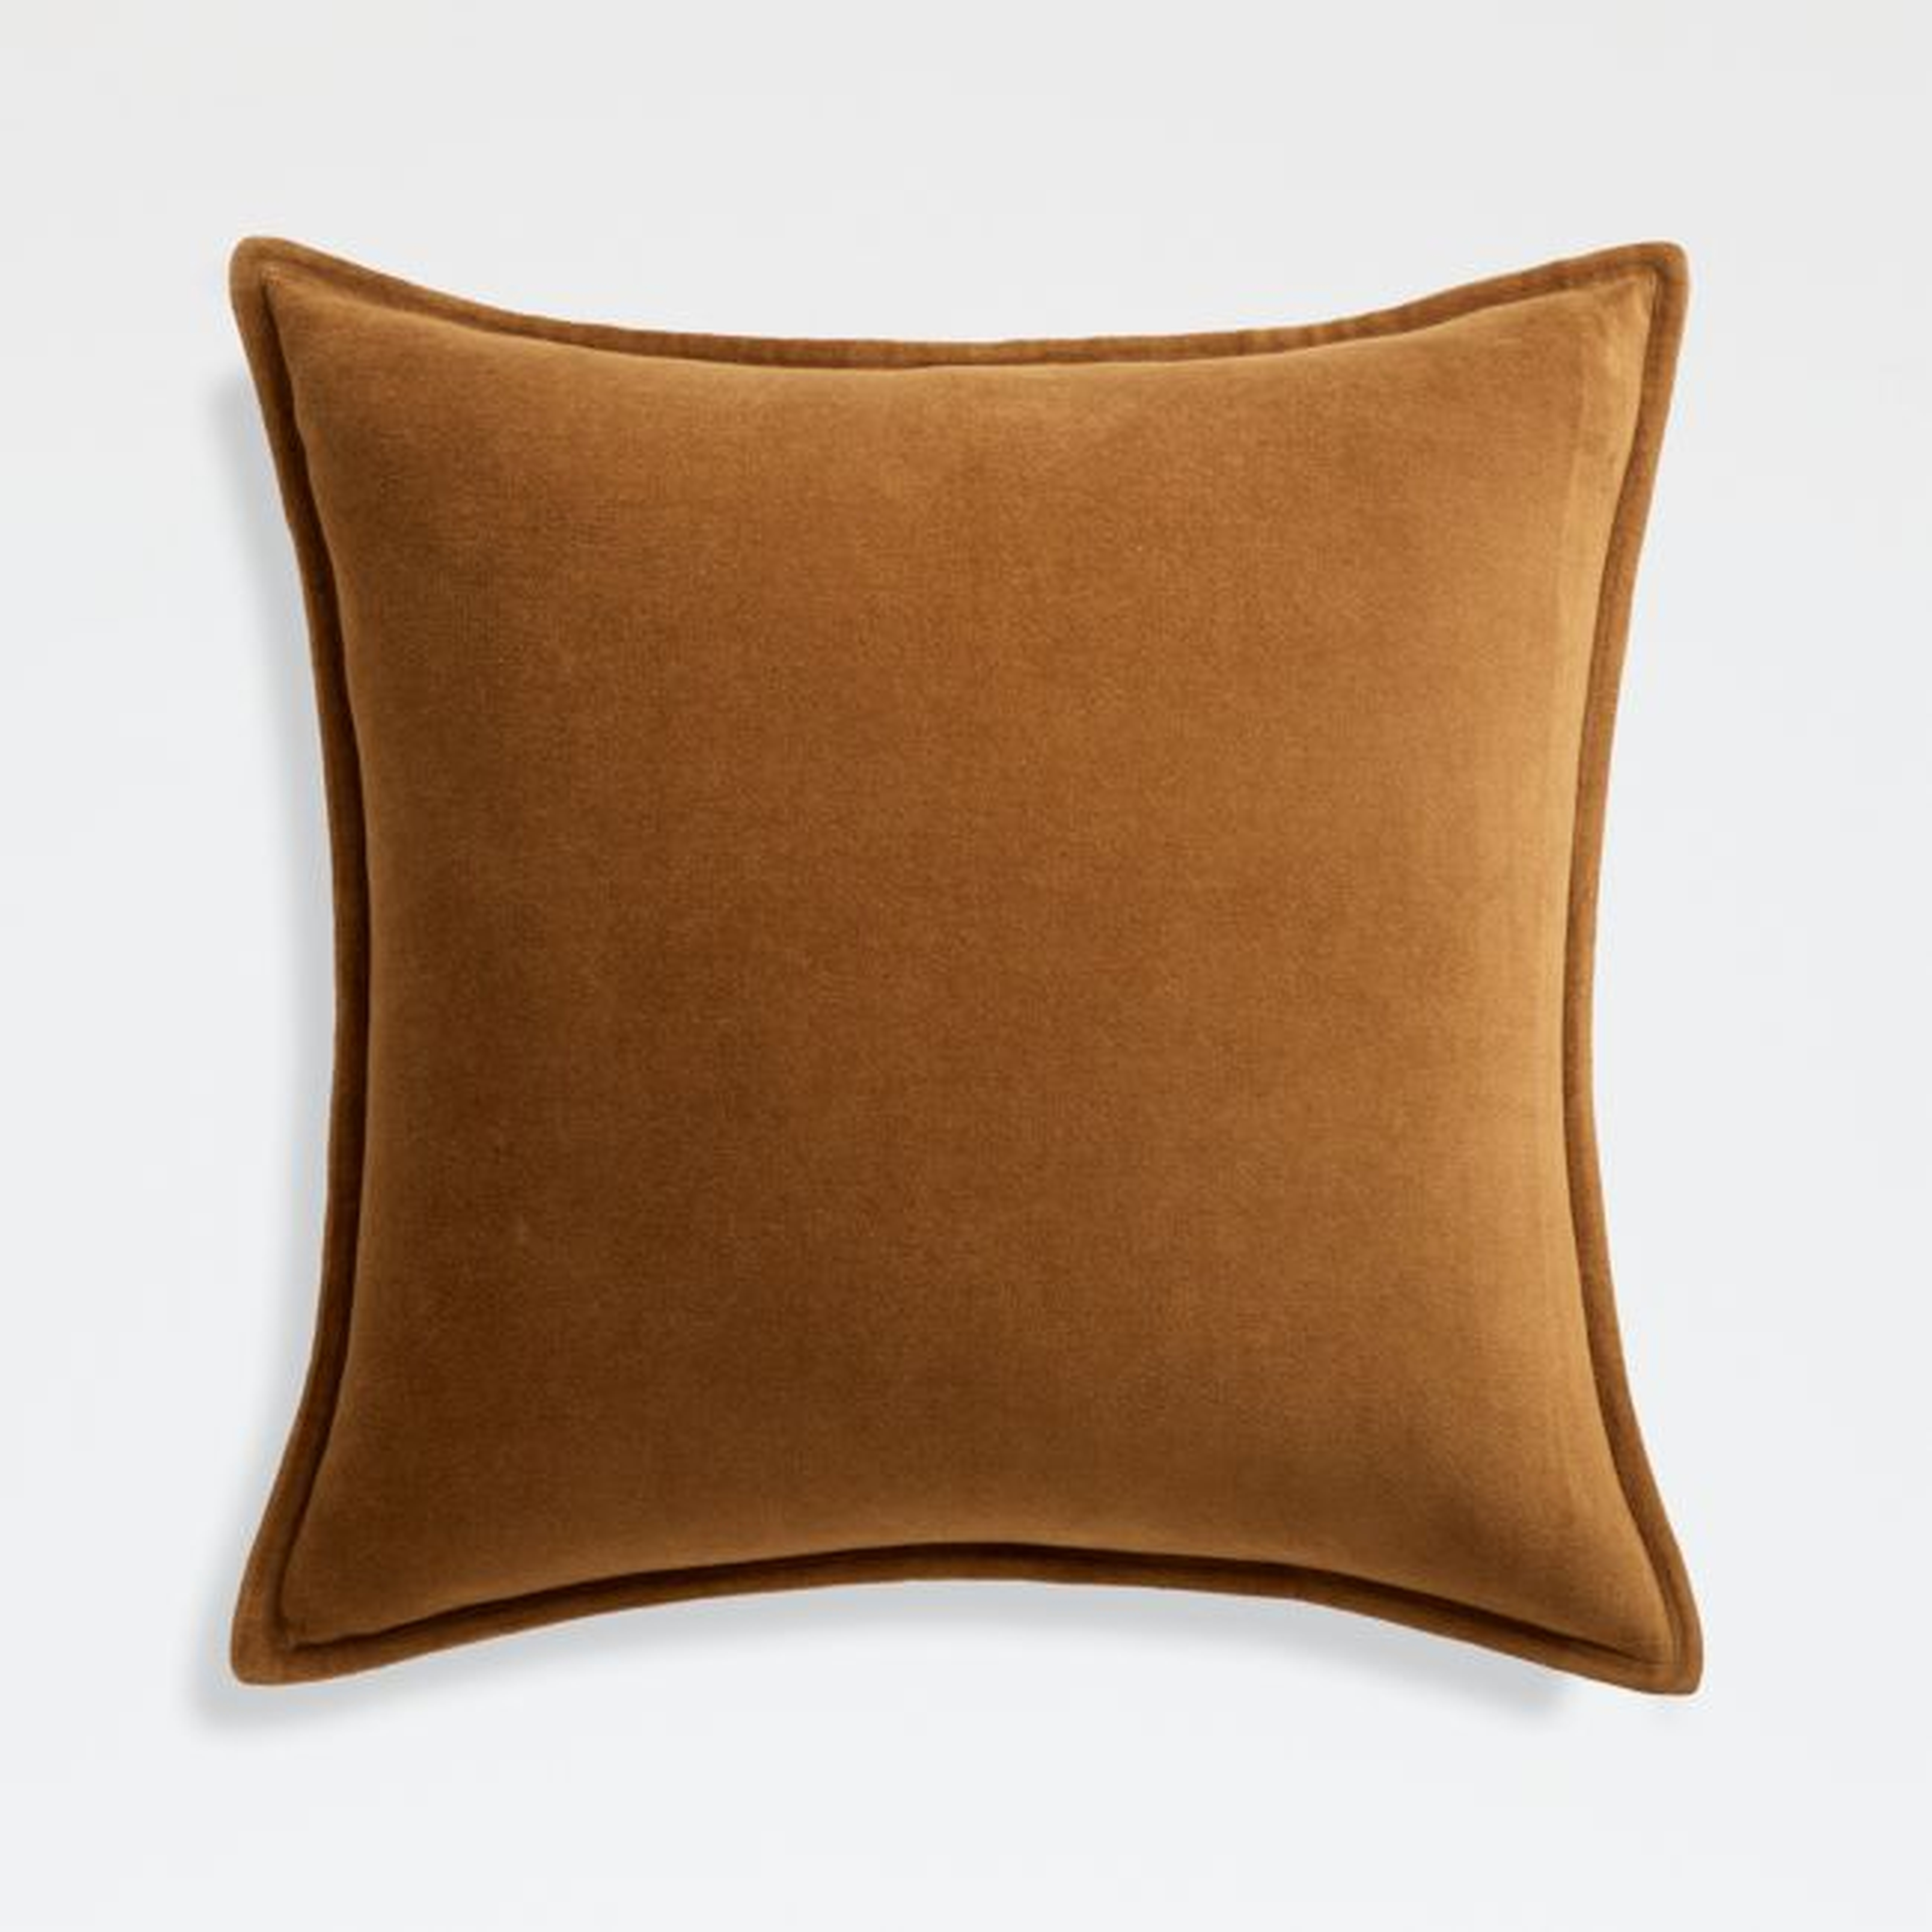 Cognac 20" Washed Cotton Velvet Pillow with Feather-Down Insert - Crate and Barrel